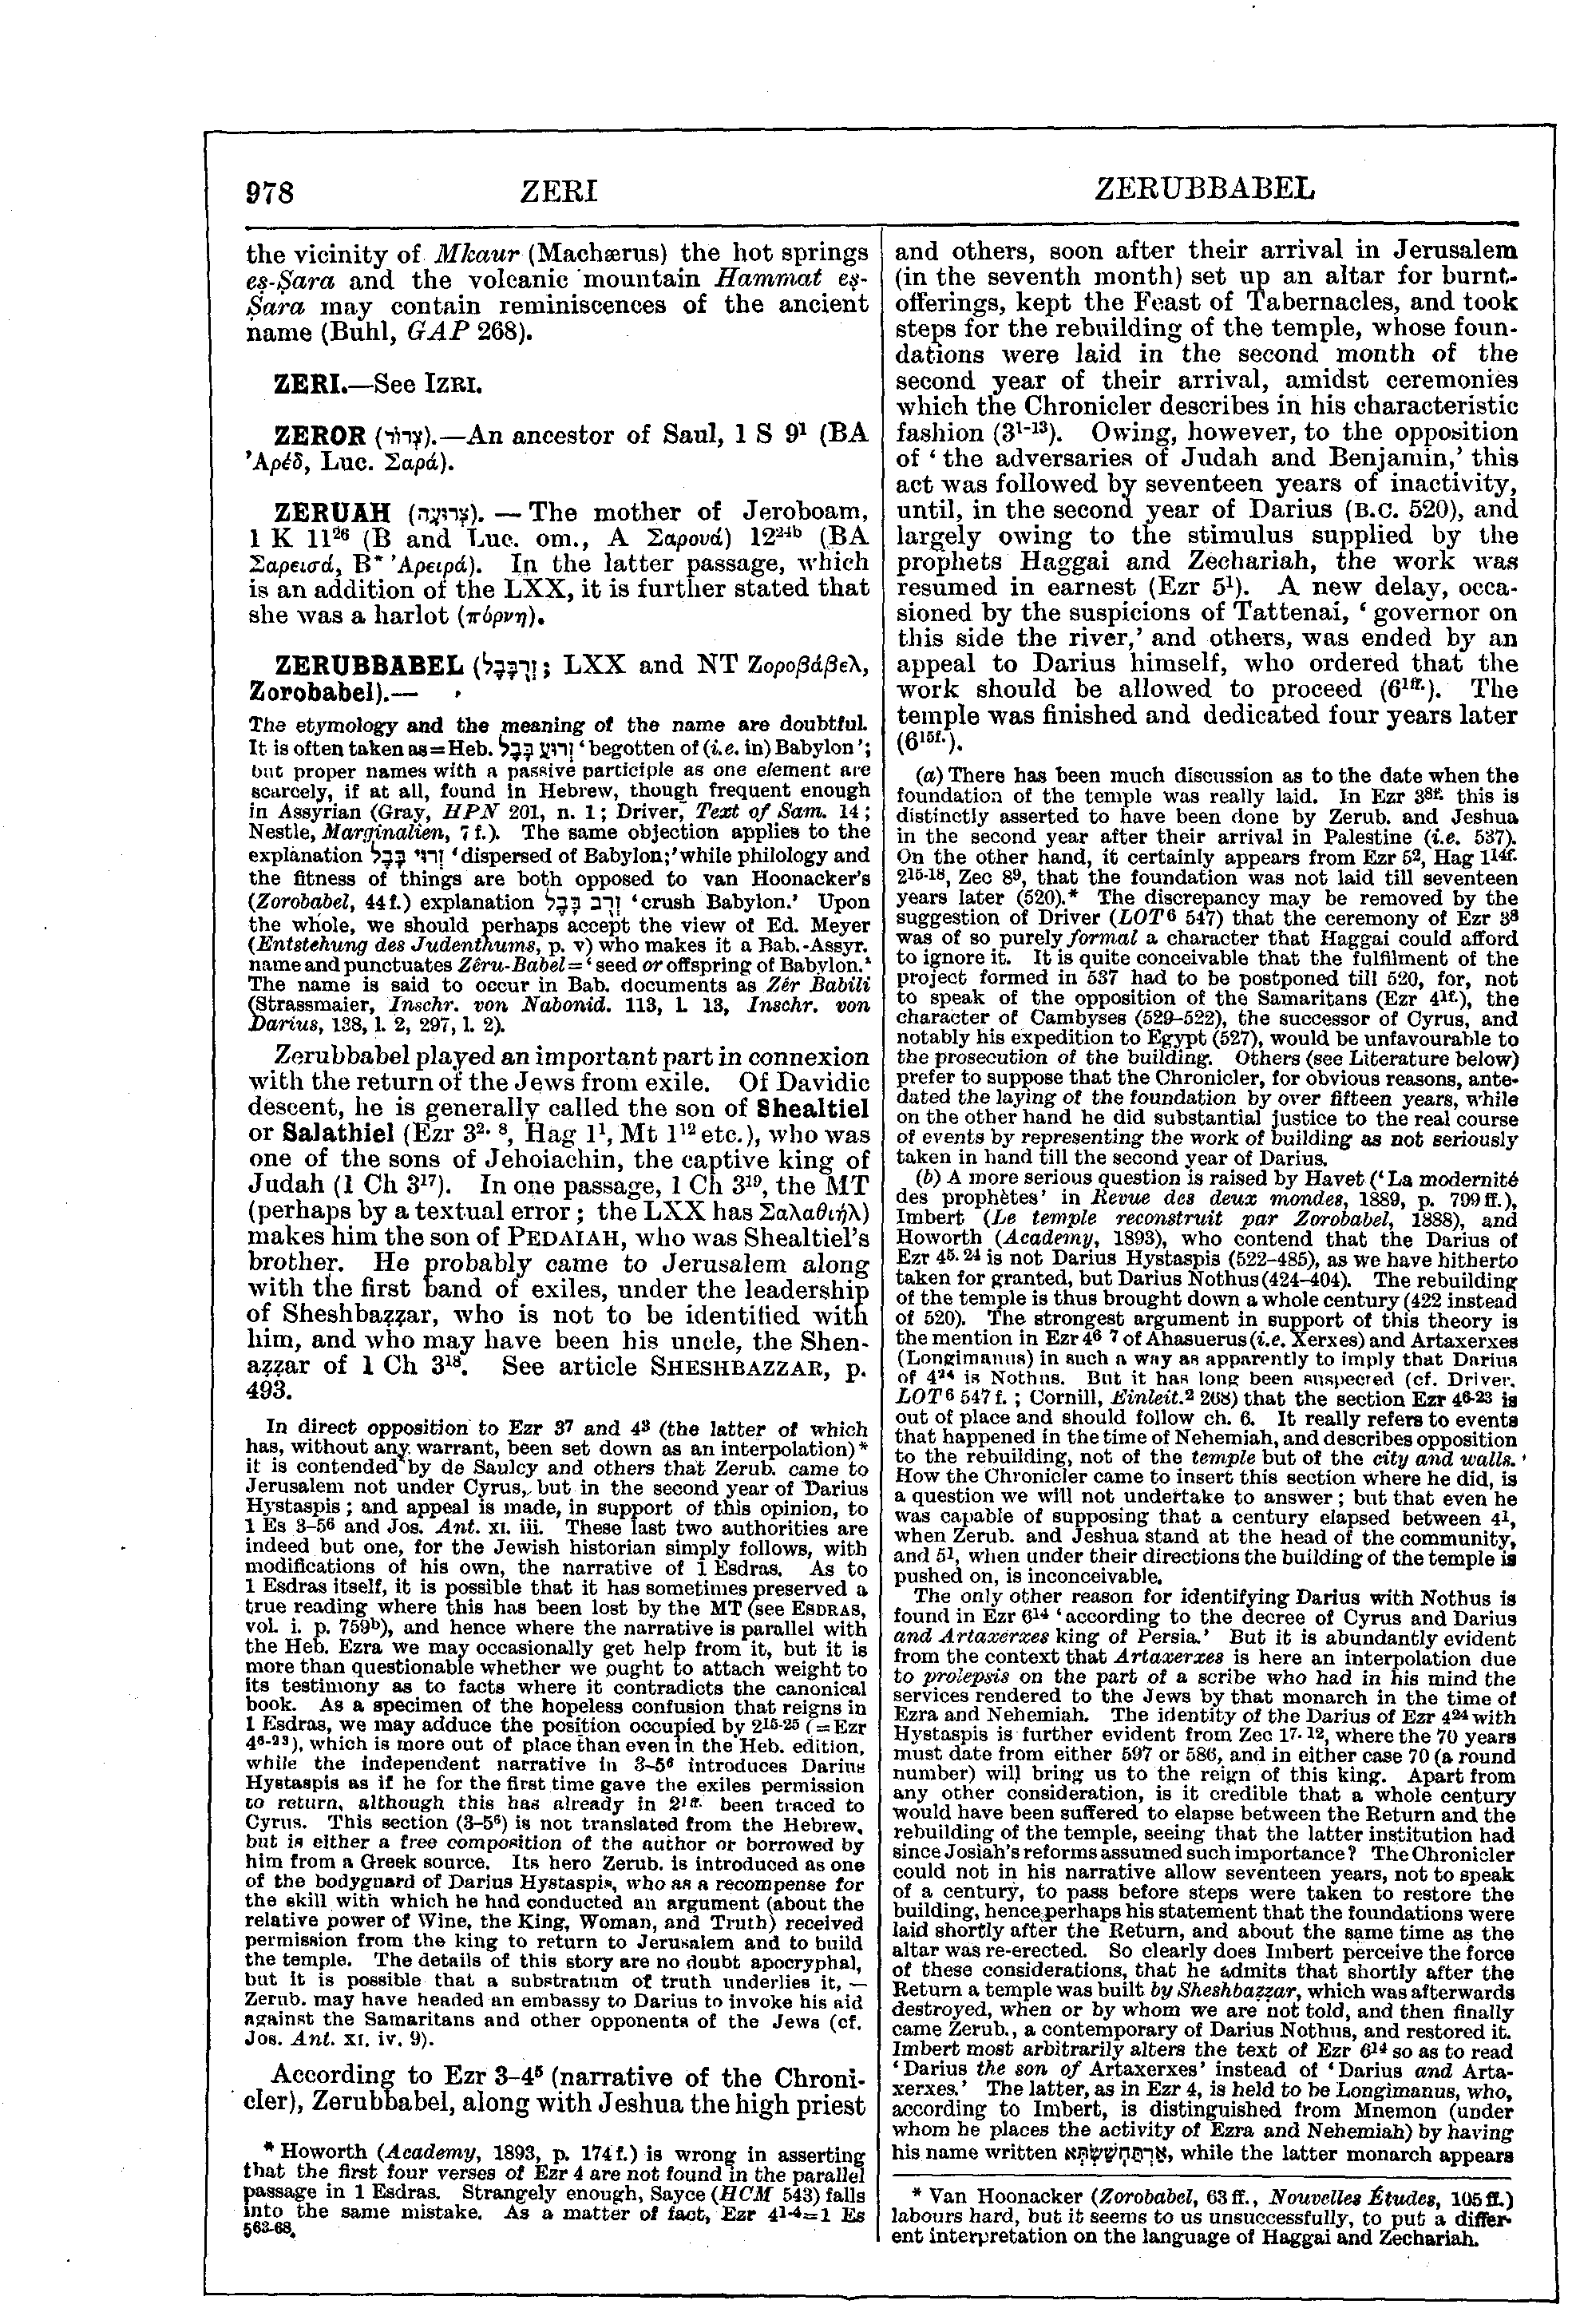 Image of page 978